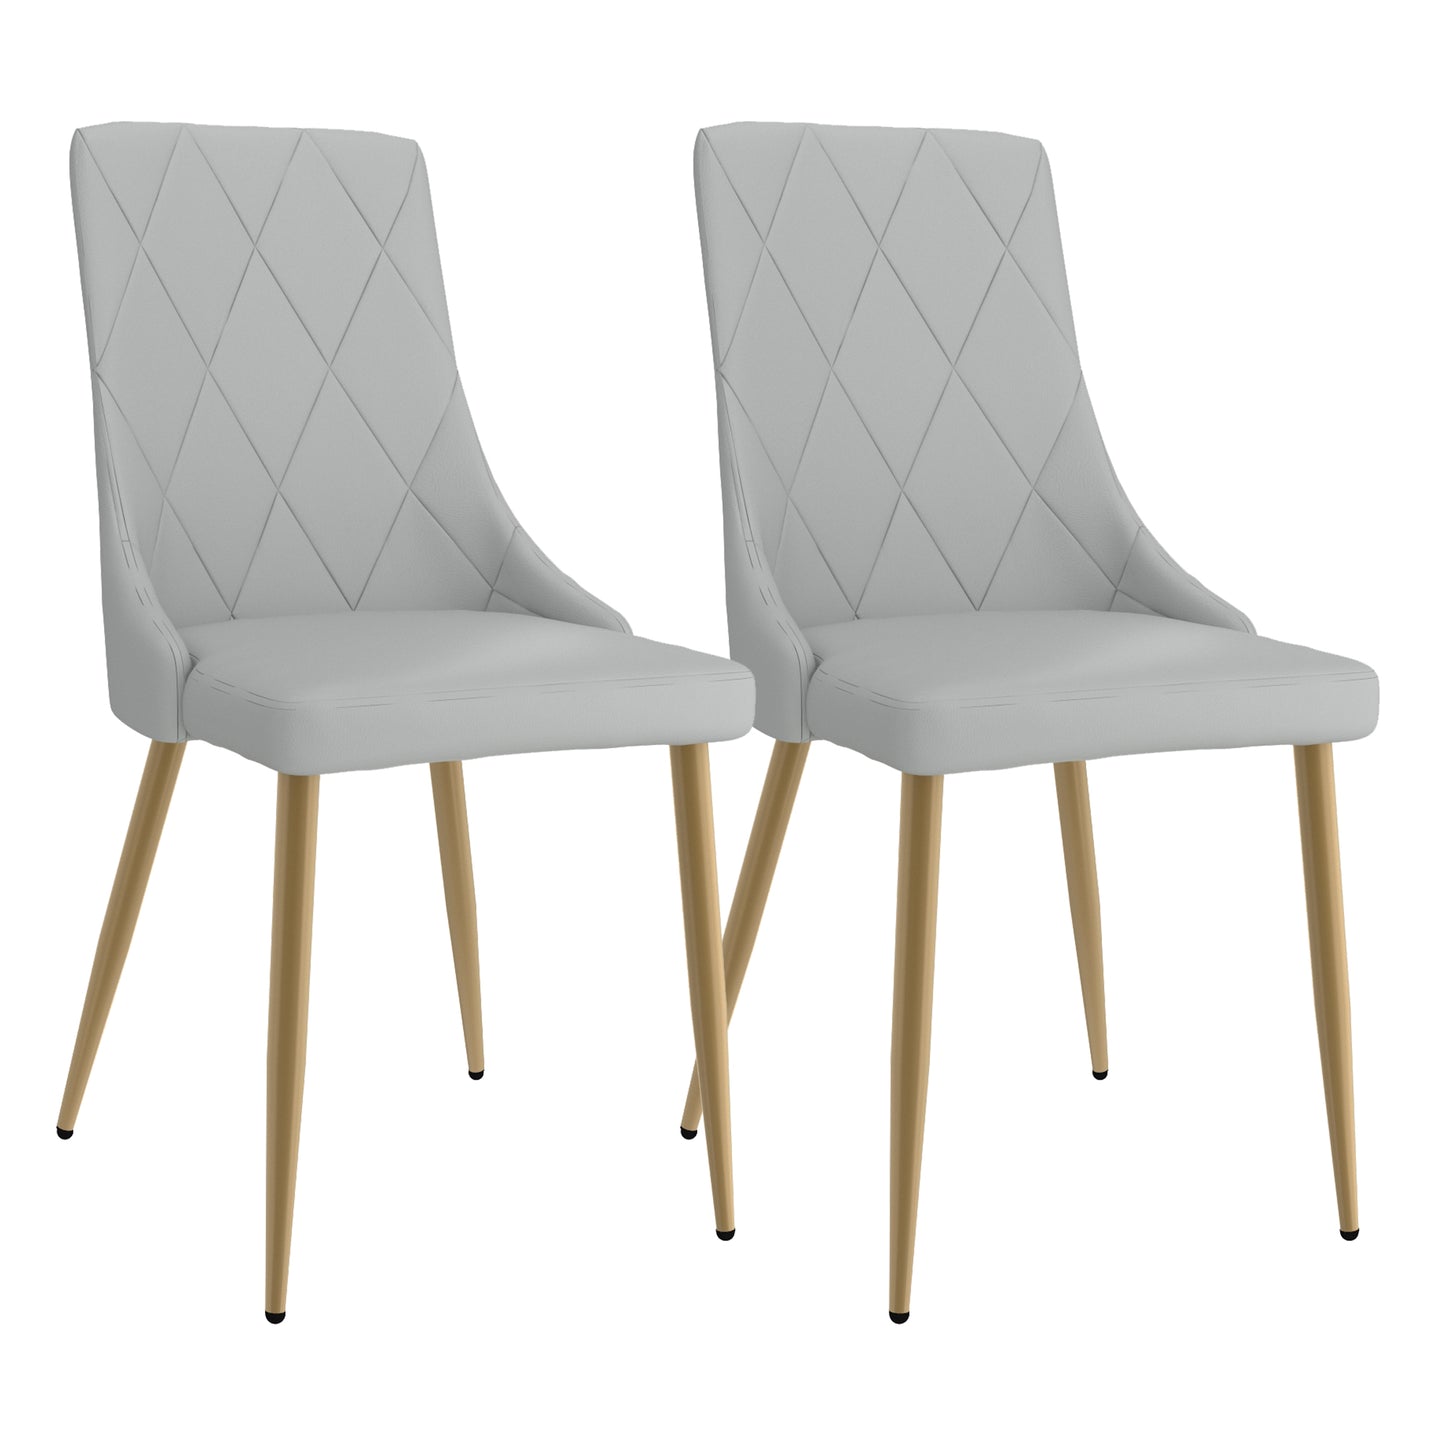 (ANTOINE LIGHT GREY AND GOLD- 2 PACK)- LEATHER DINING CHAIRS